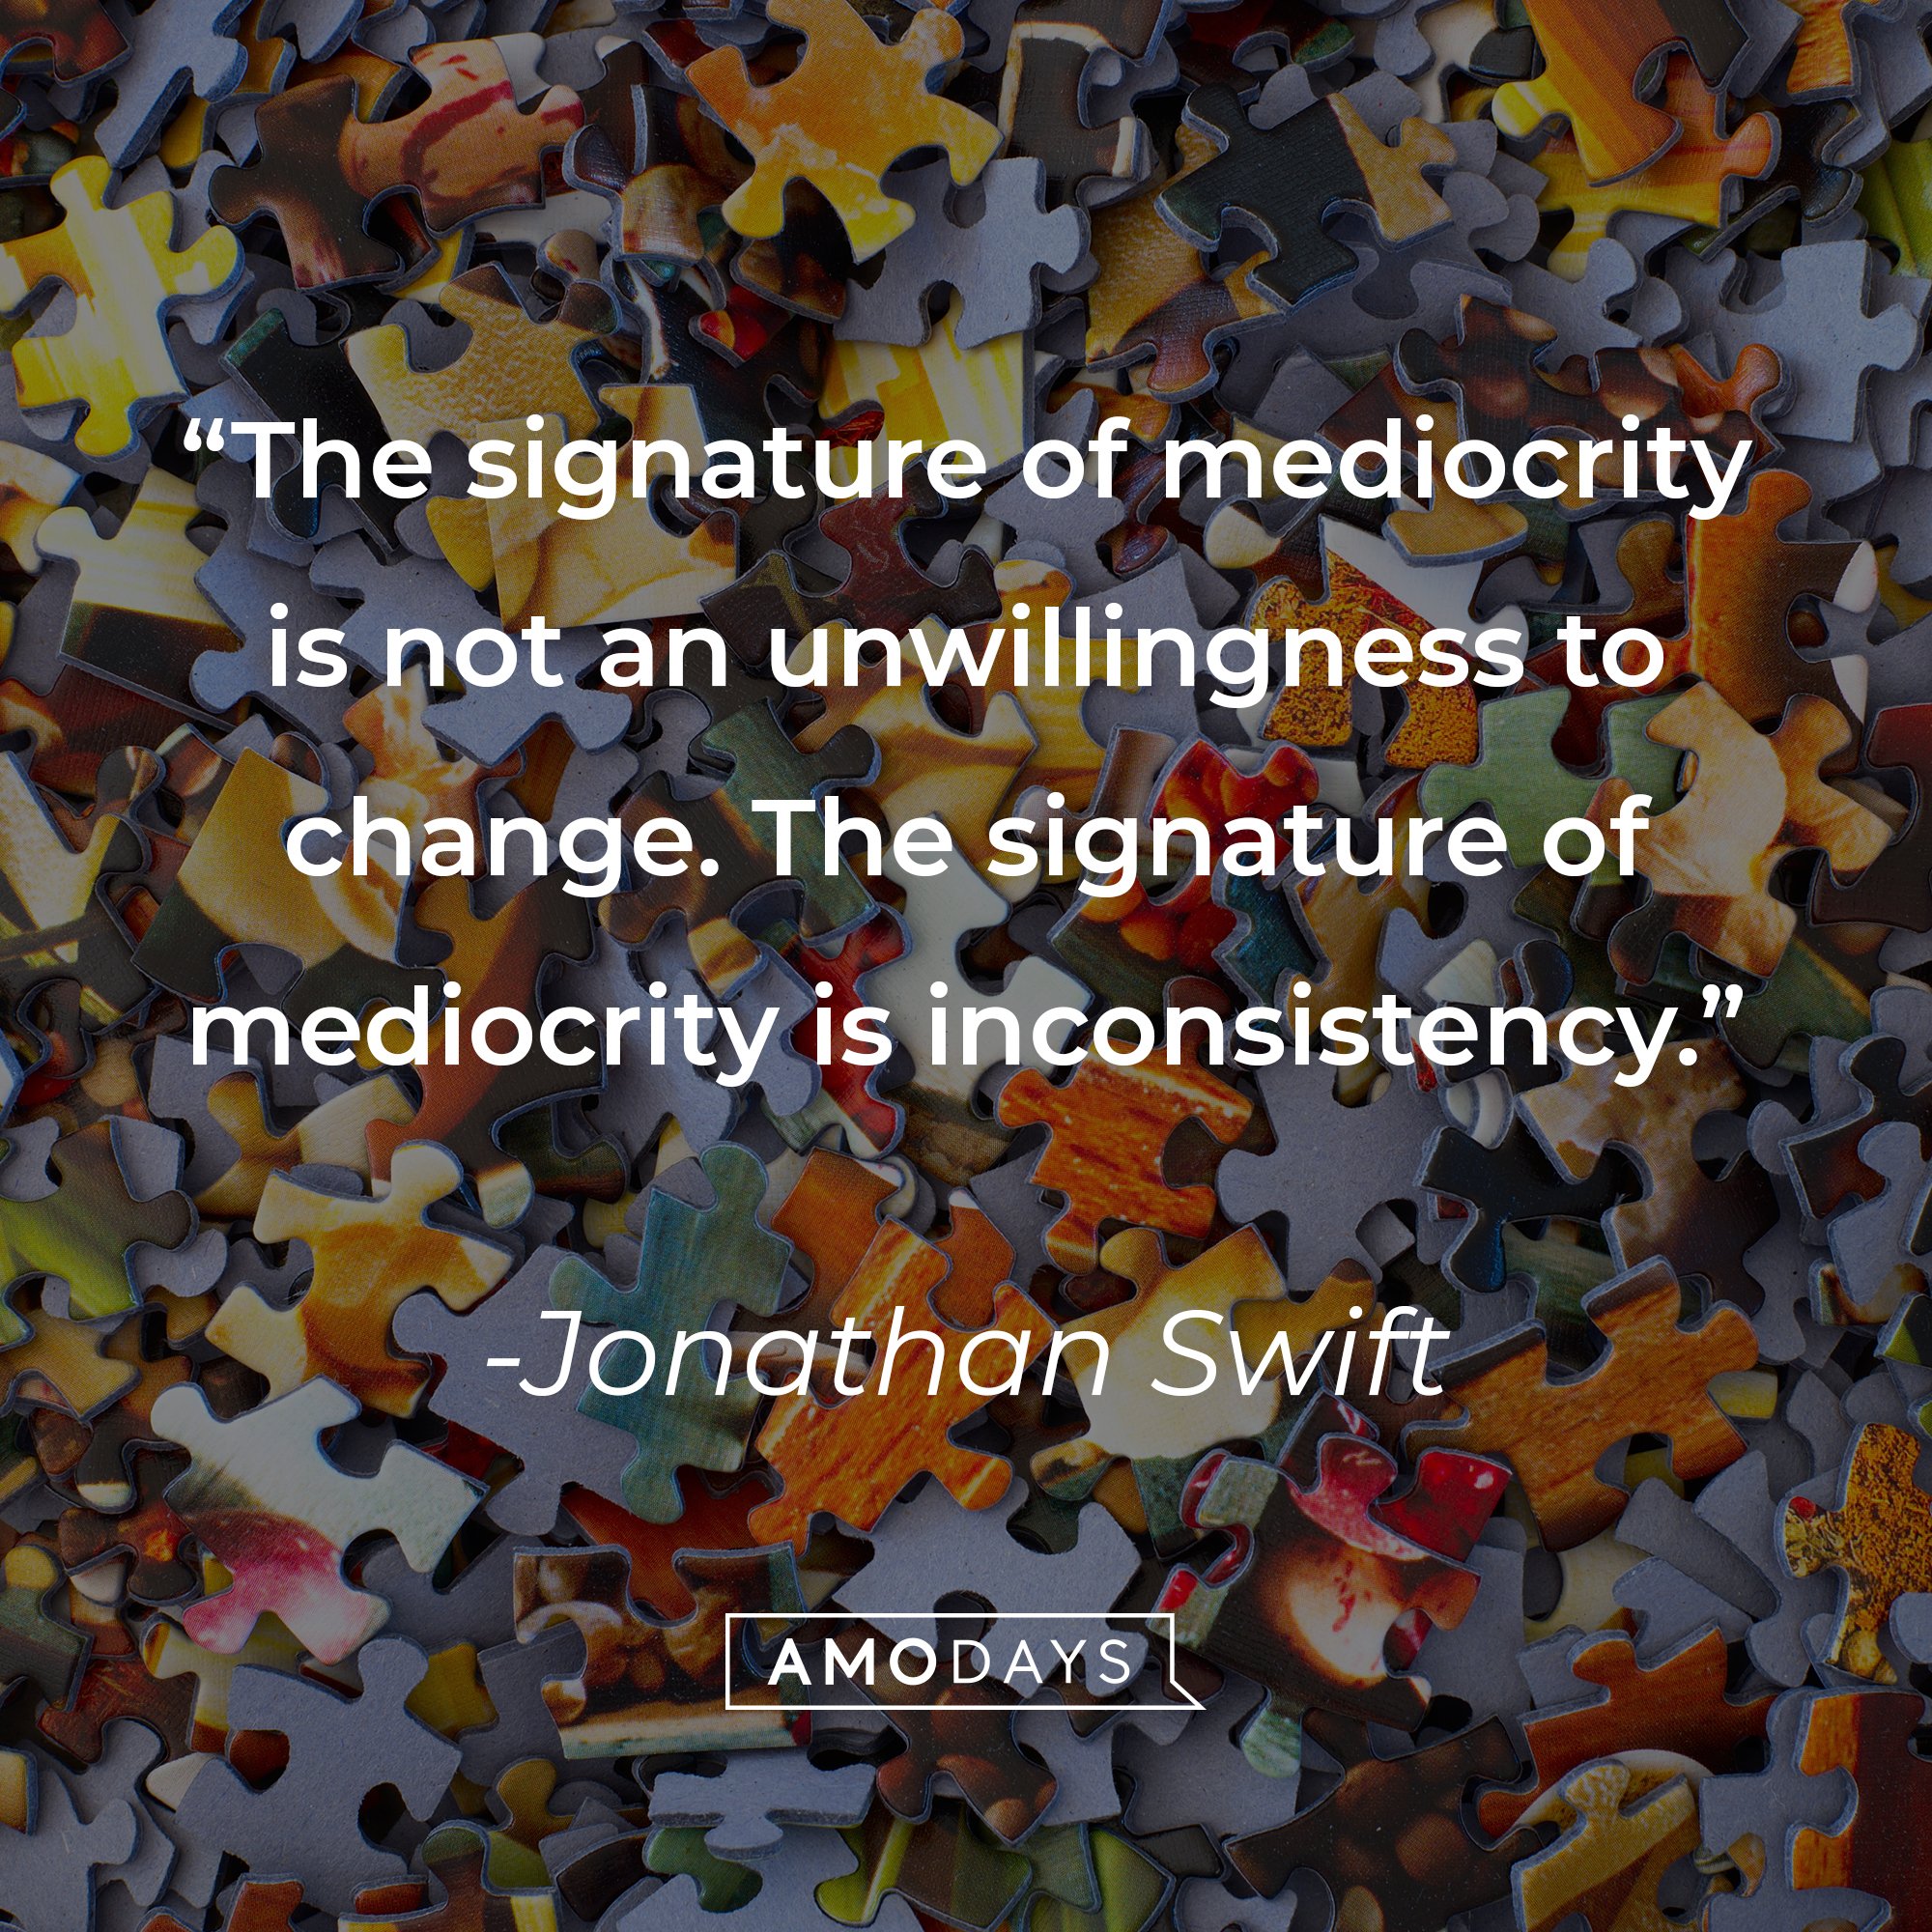 Jonathan Swift's quote: "There is nothing constant in this world but inconsistency." | Image: AmoDays